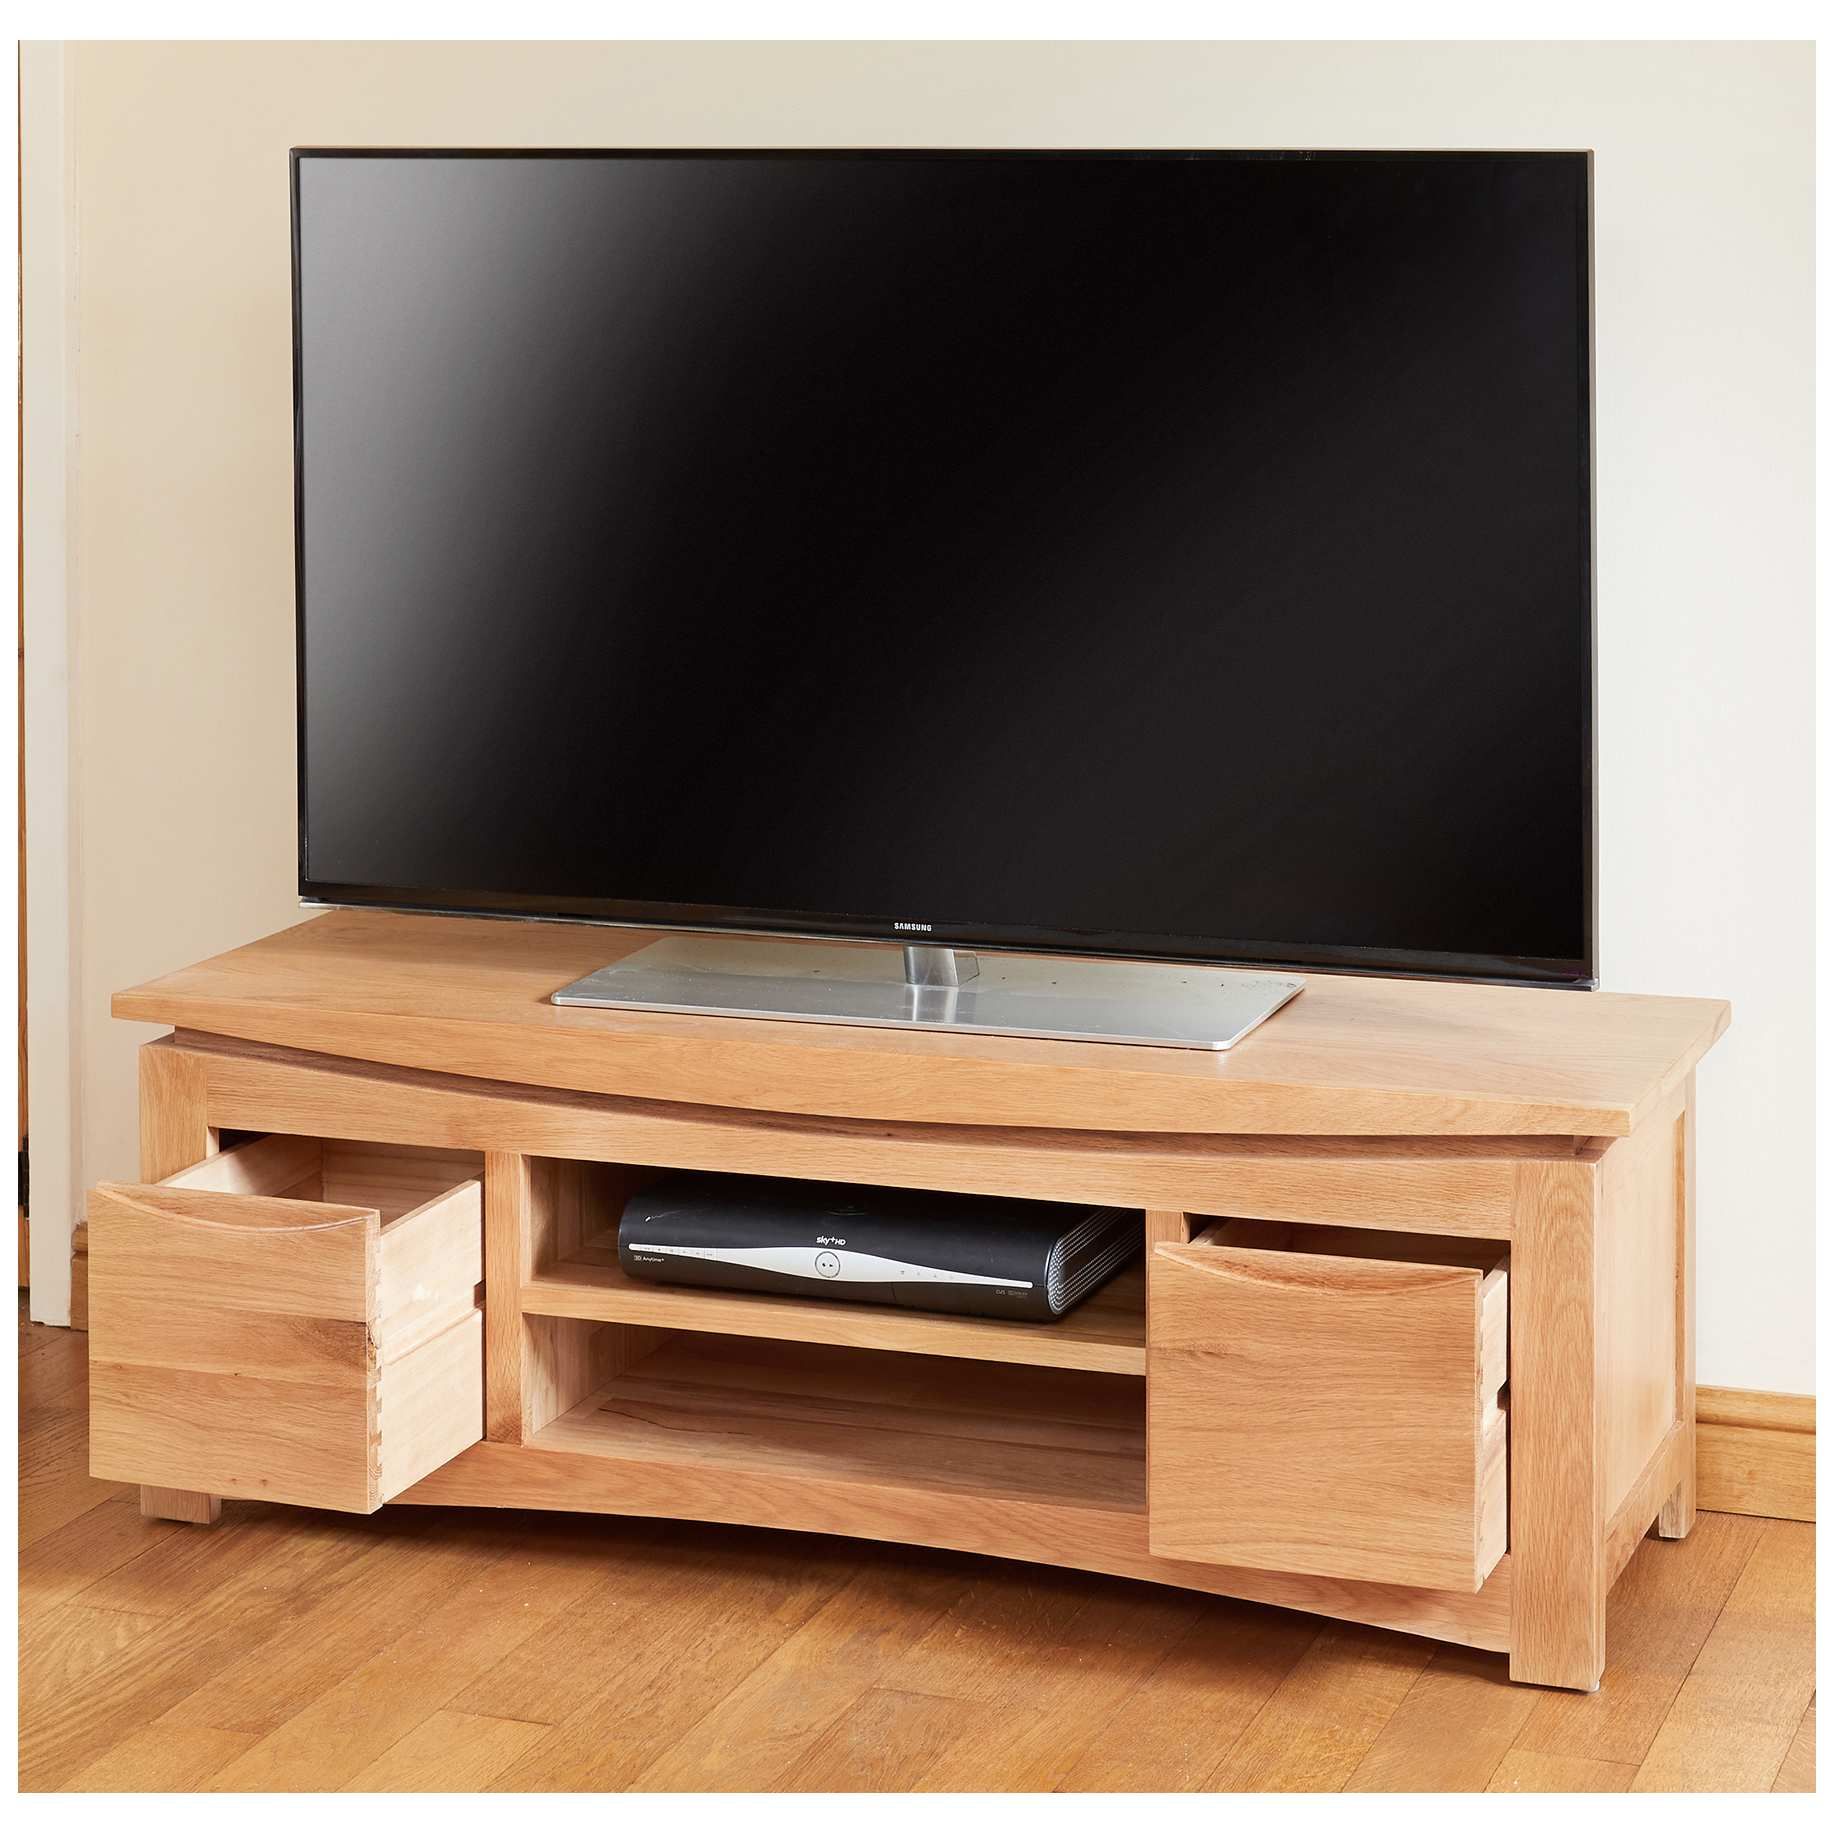 Addison Solid Oak Widescreen Television Cabinet | Free Uk With Oak Widescreen Tv Unit (View 3 of 15)